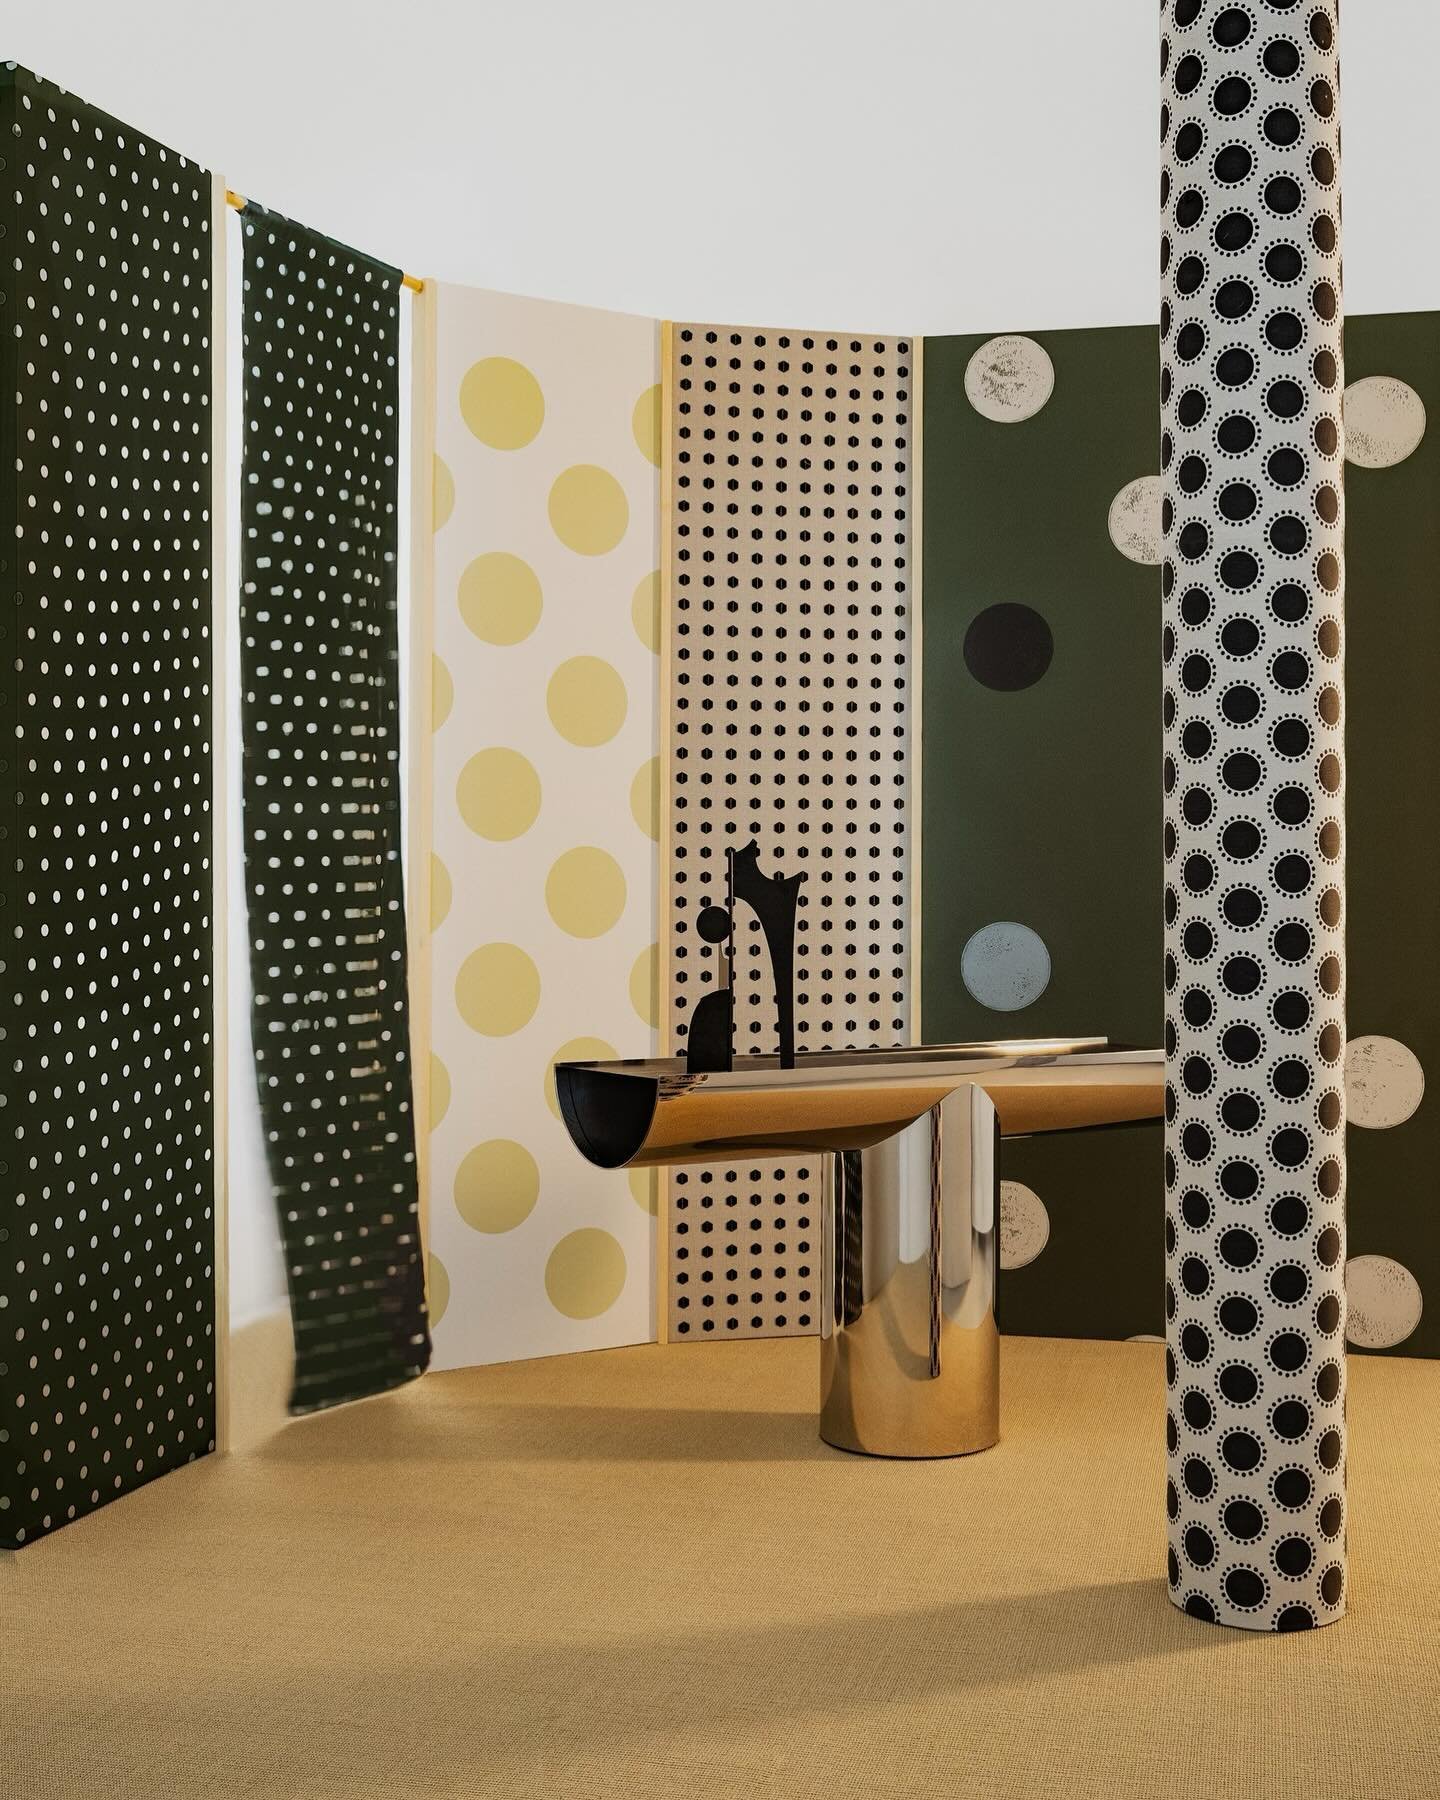 A shot from my decorating feature from the April issue of @elledecorationuk photographed by the talented @jack.wilson.photo. Thank you to @mrbspriggs for the commission.  Thank you to @london_art_makers 🙏 

#spots #dots #magazineshoot #spottyinterio